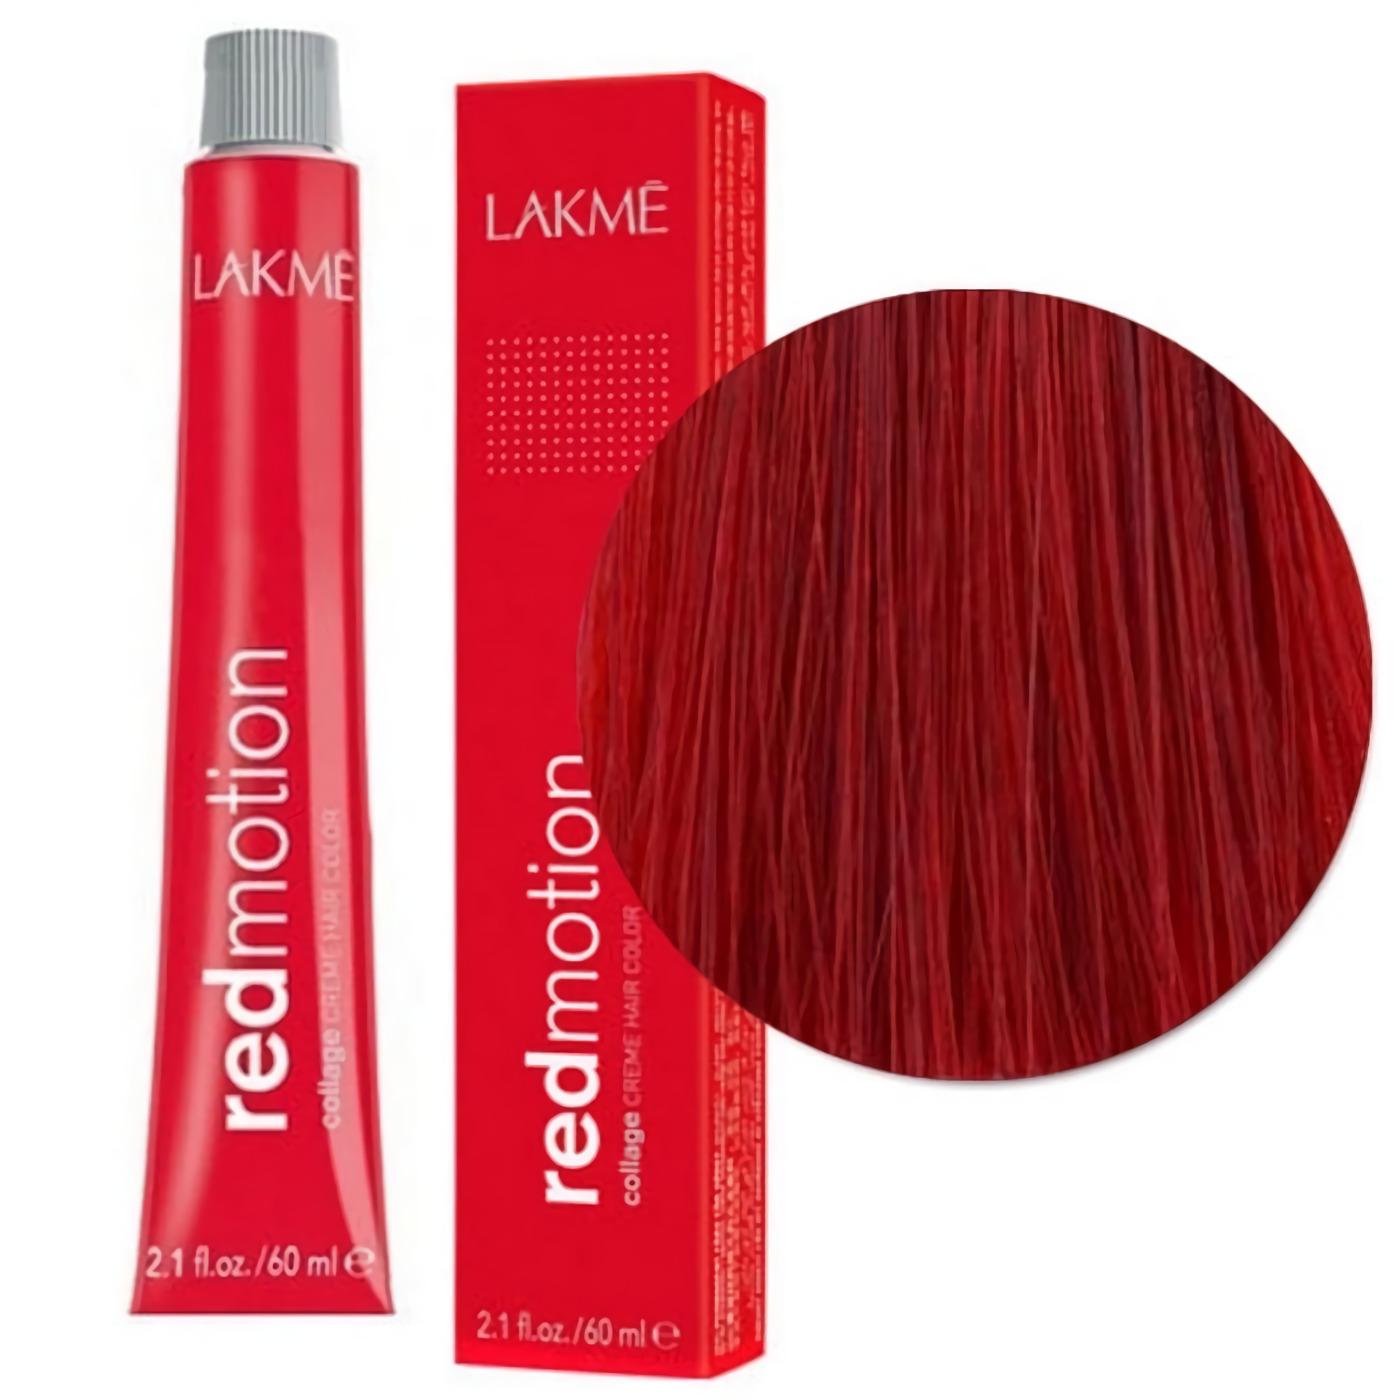 Lakme collage rouge